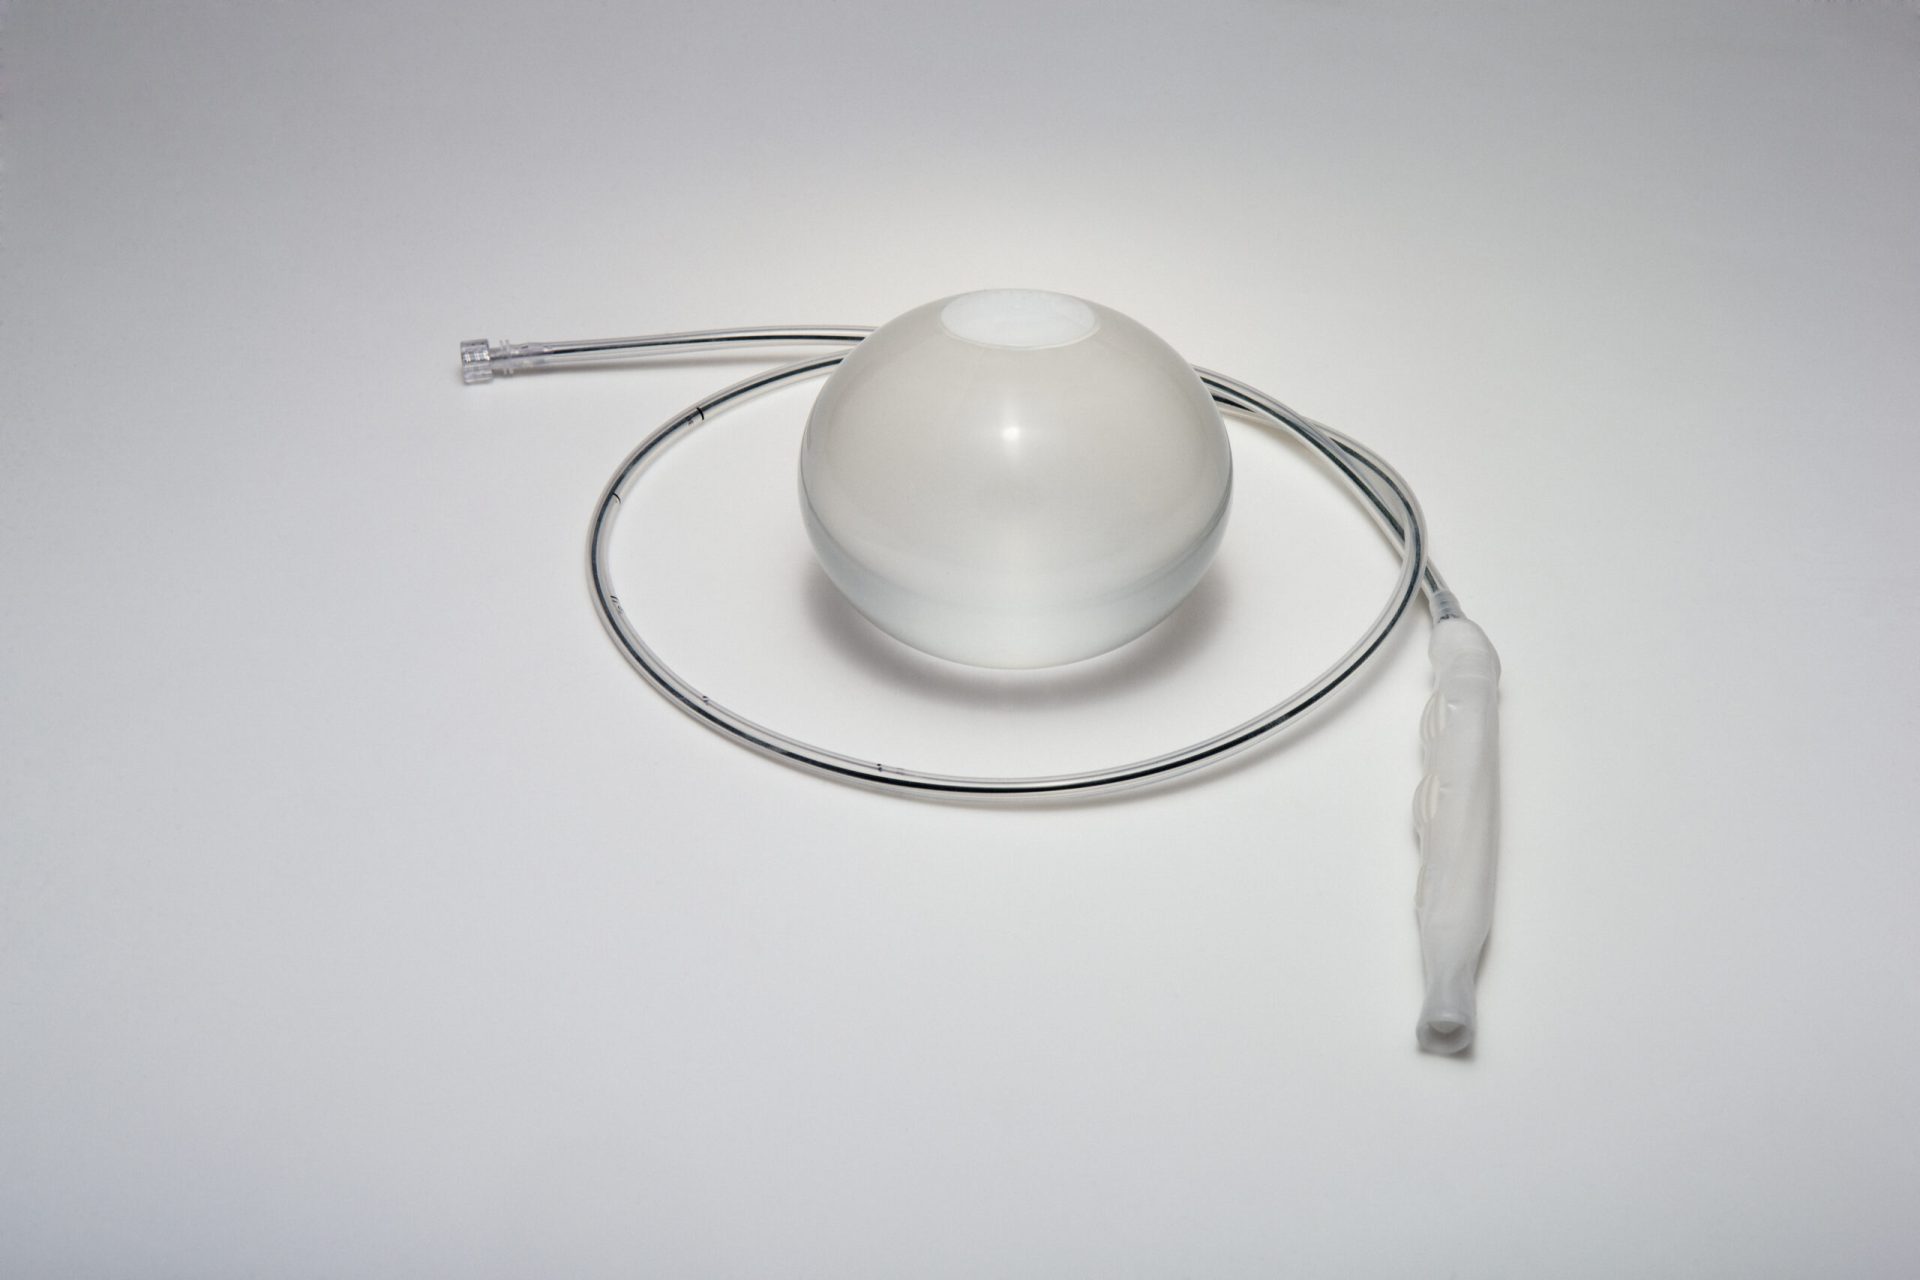 Orbera Balloon - A Non-Surgical Solution For Effective Weight Loss